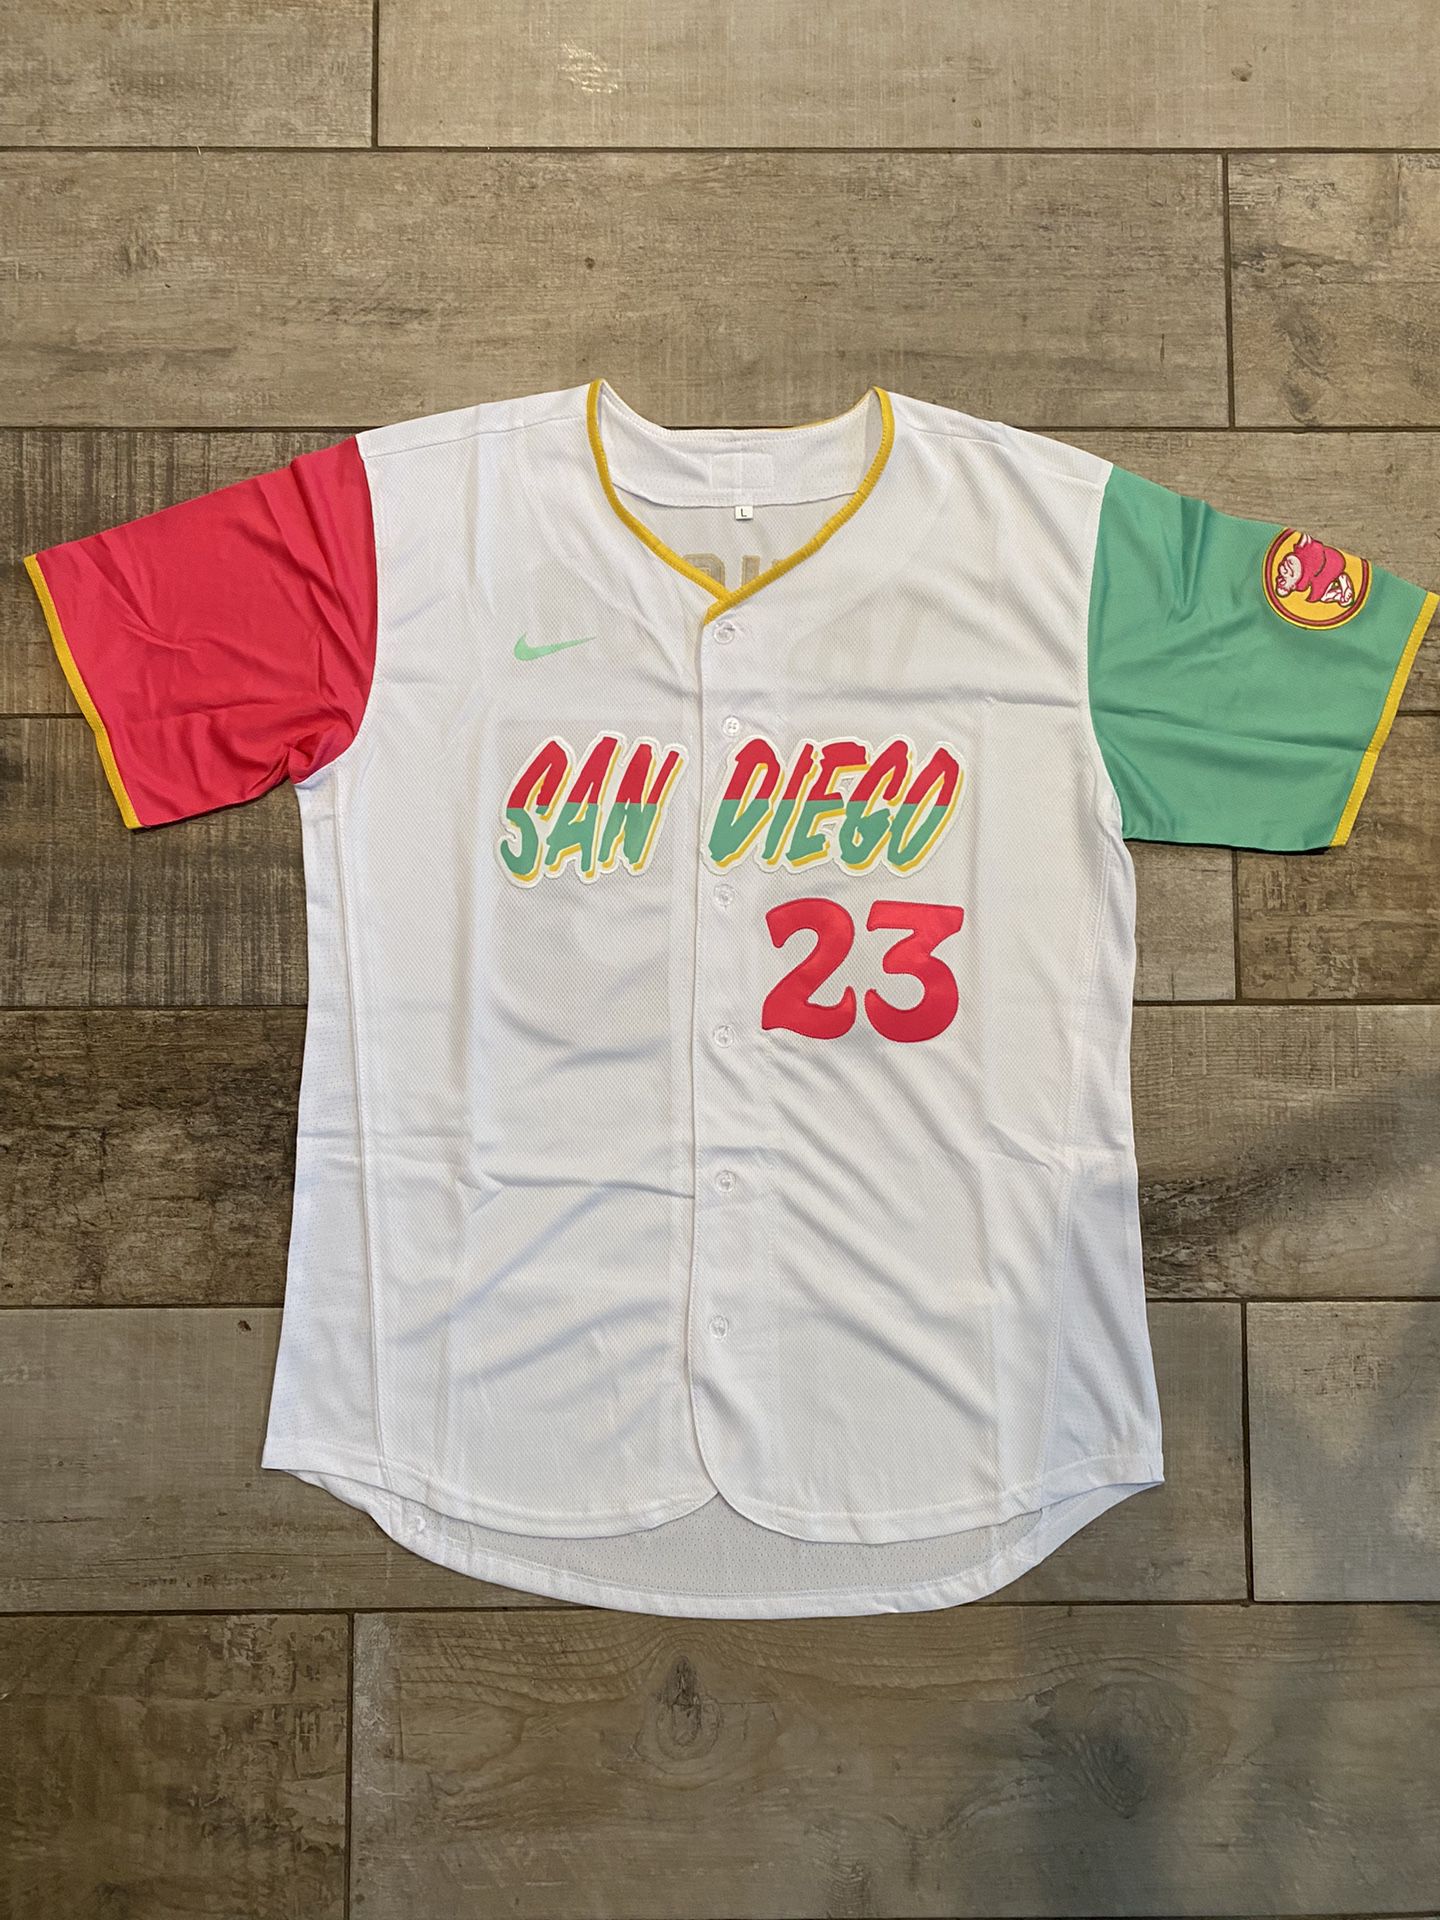 Padres Tatis jr Jersey for Sale in San Diego, CA - OfferUp